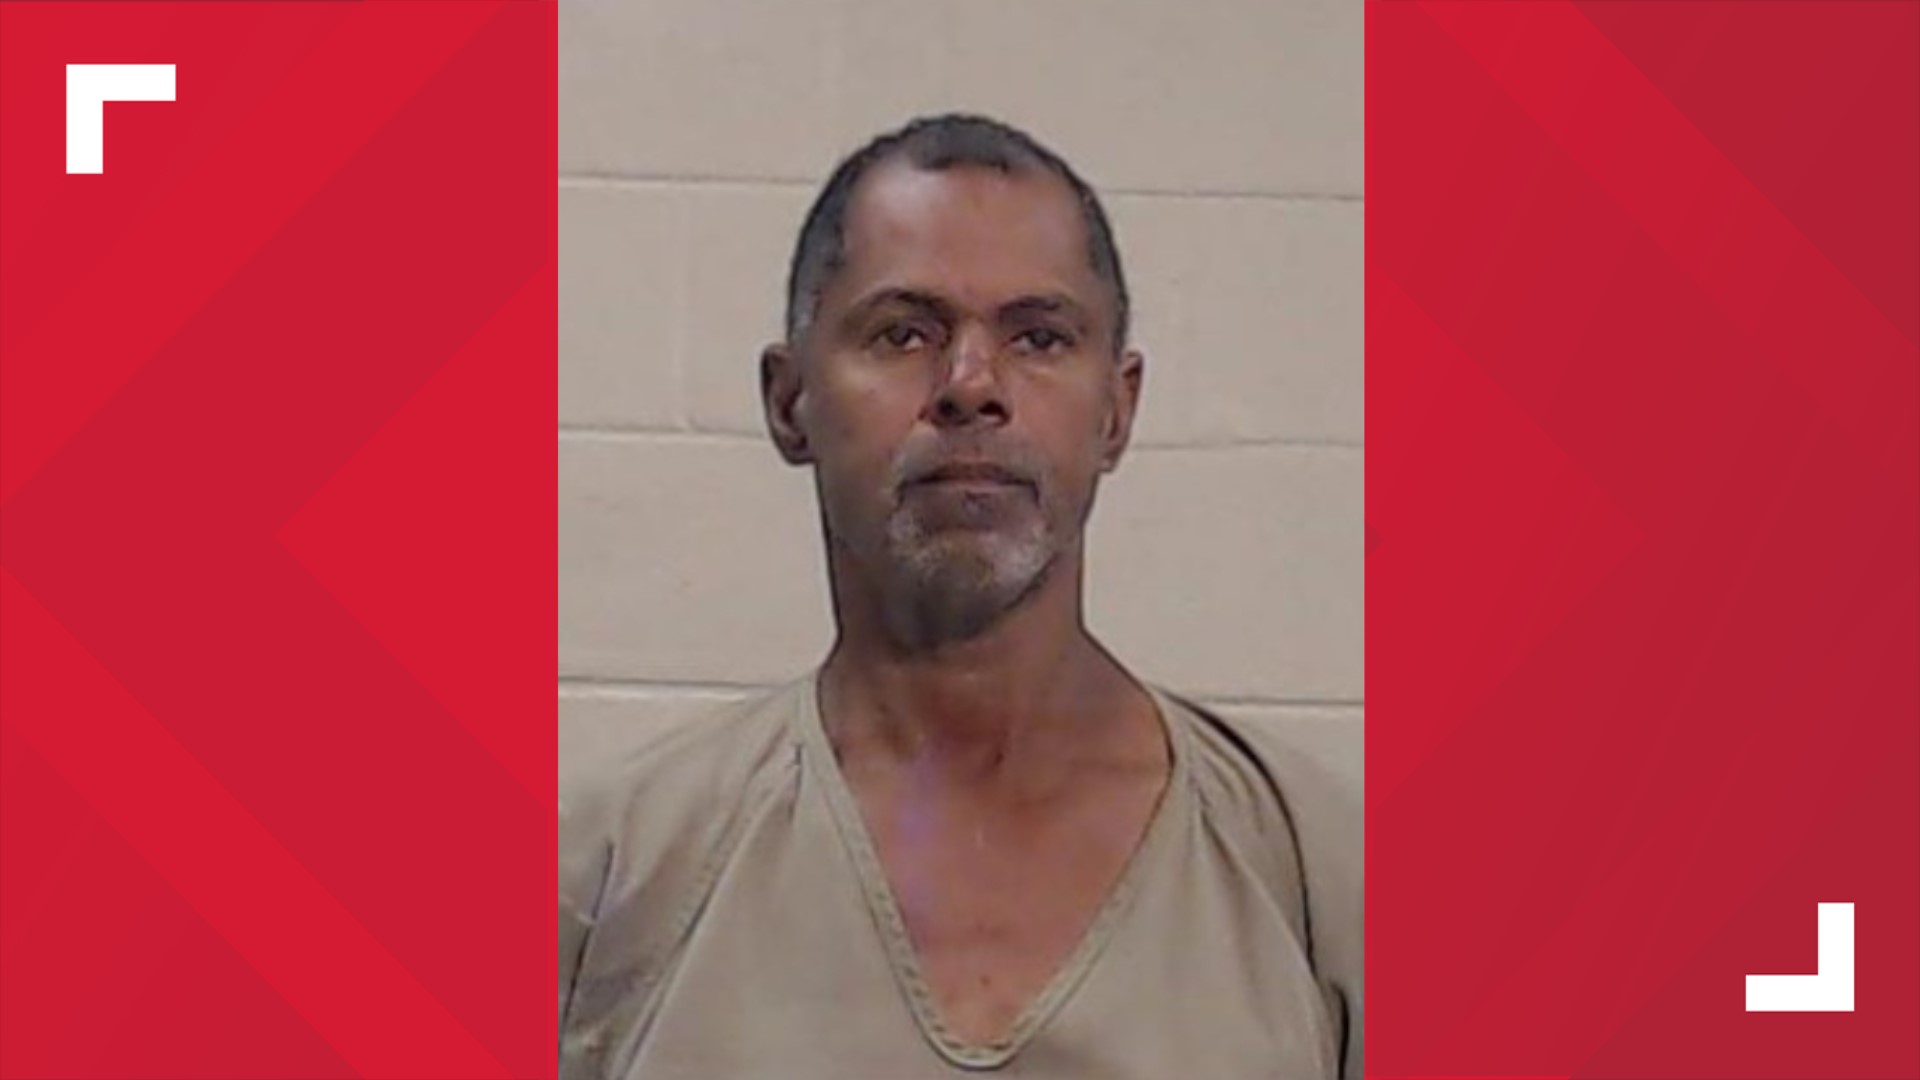 56-year-old Tony Cleaver is wanted for burglary of habitation, assault causing bodily injury and evading arrest or detention.